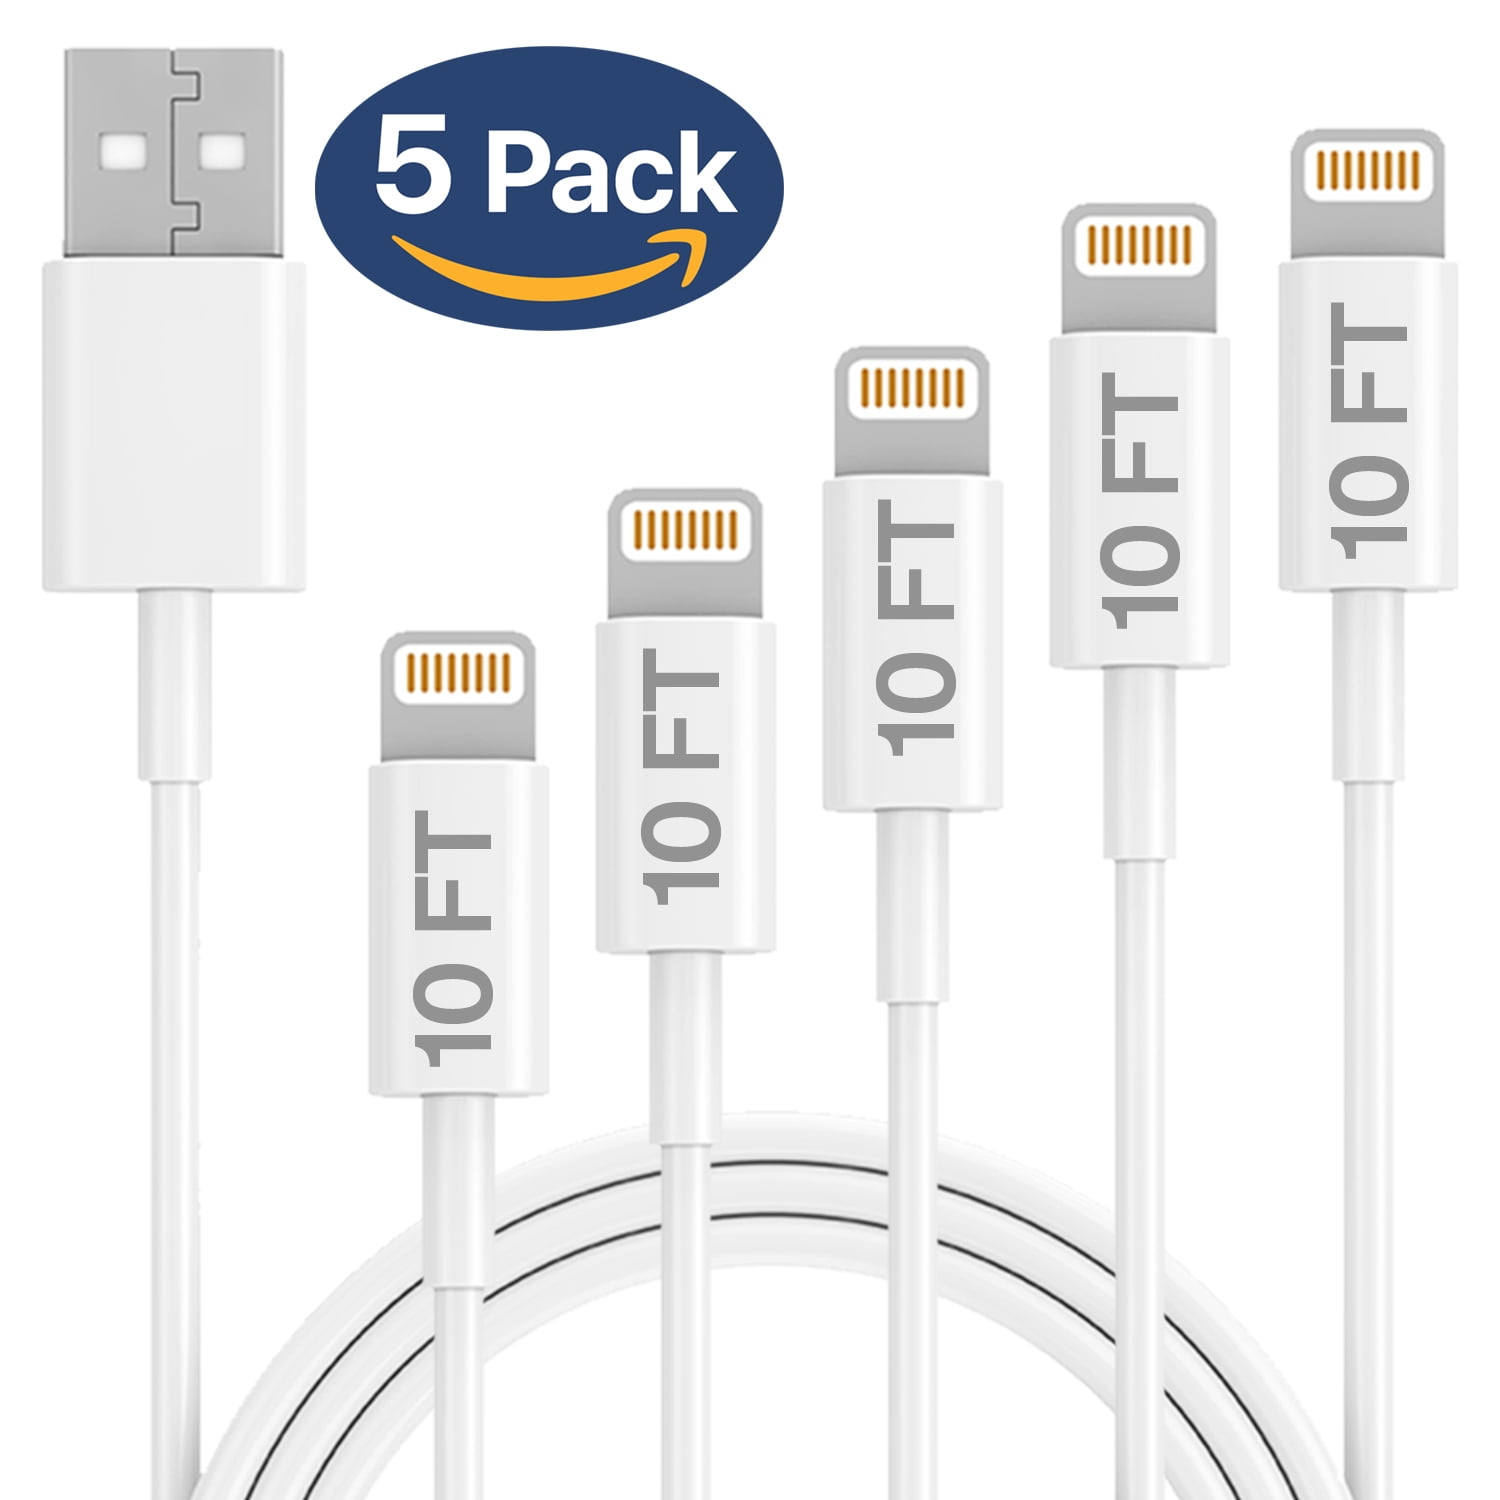 iPhone Charger,MFi Certified Lightning Cable 4 Pack 6FT Extra Long Nylon Braided USB Charging & Syncing Cord Compatible iPhone Xs/Xs Max/XR/X/8/8 Plus/7/7 Plus/6S/6S Plus/SE/iPad/iPod V47 